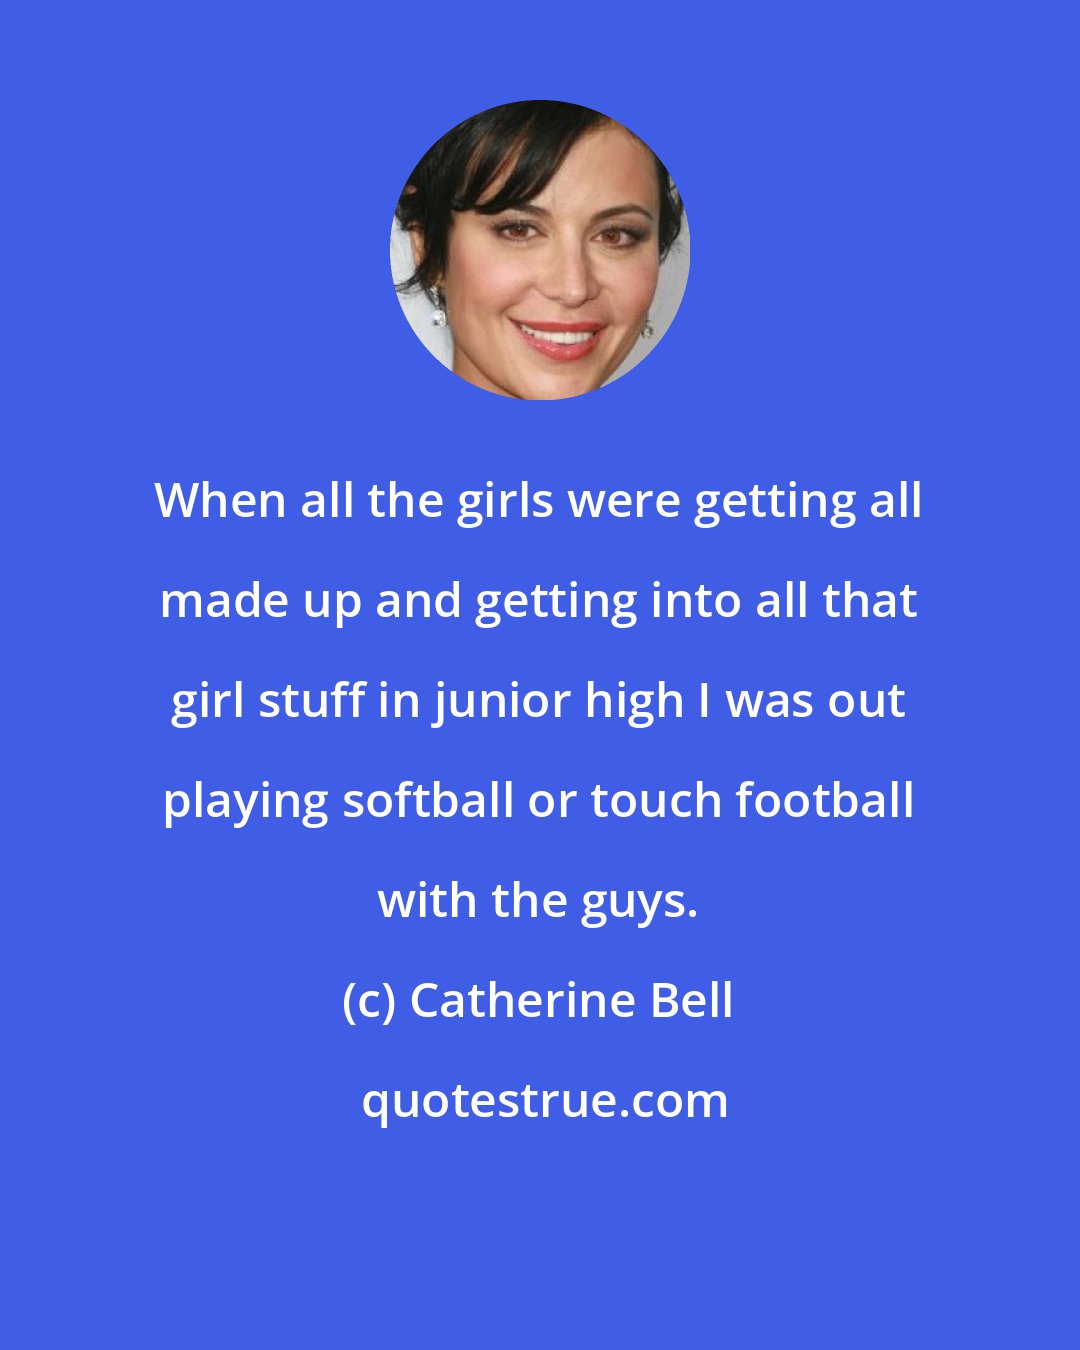 Catherine Bell: When all the girls were getting all made up and getting into all that girl stuff in junior high I was out playing softball or touch football with the guys.